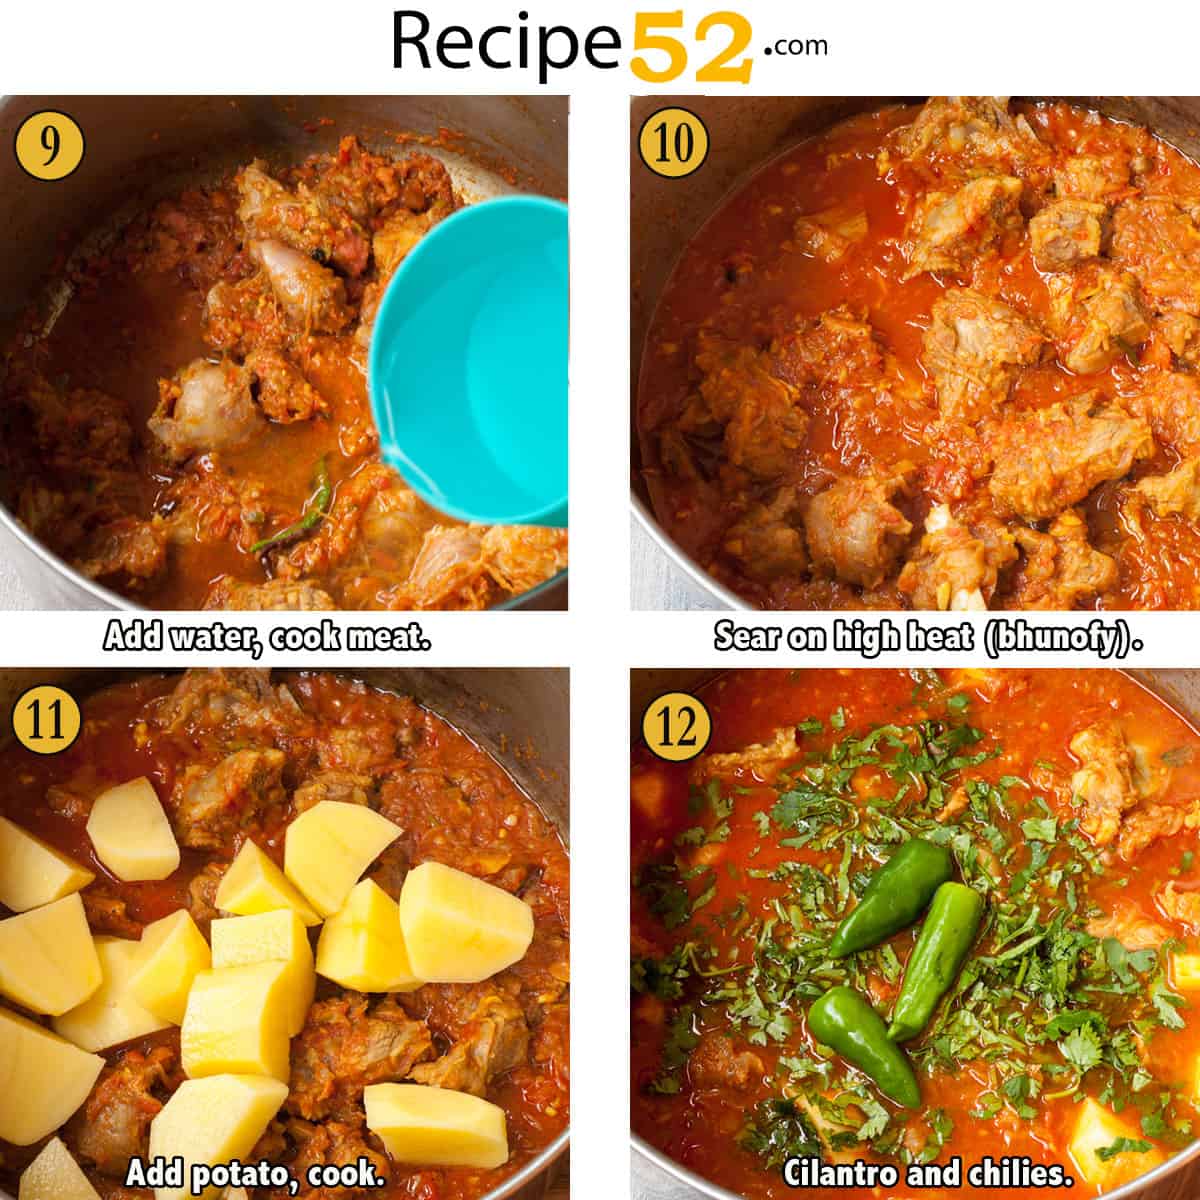 Steps to show cooking potato in goat curry.